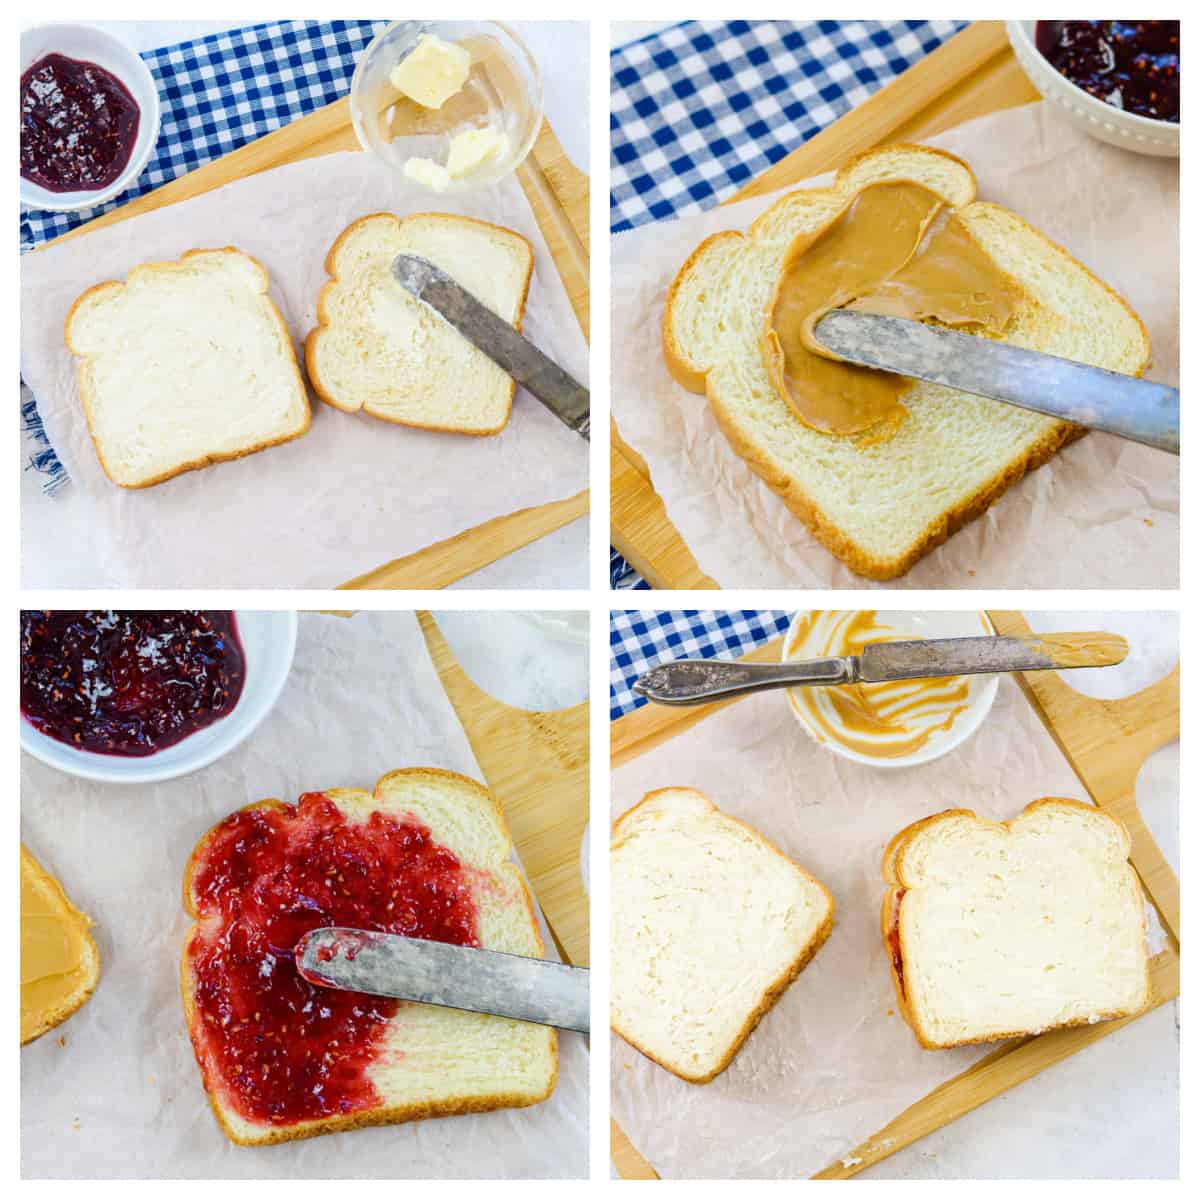 Collage showing how to make grilled peanut butter and jelly.